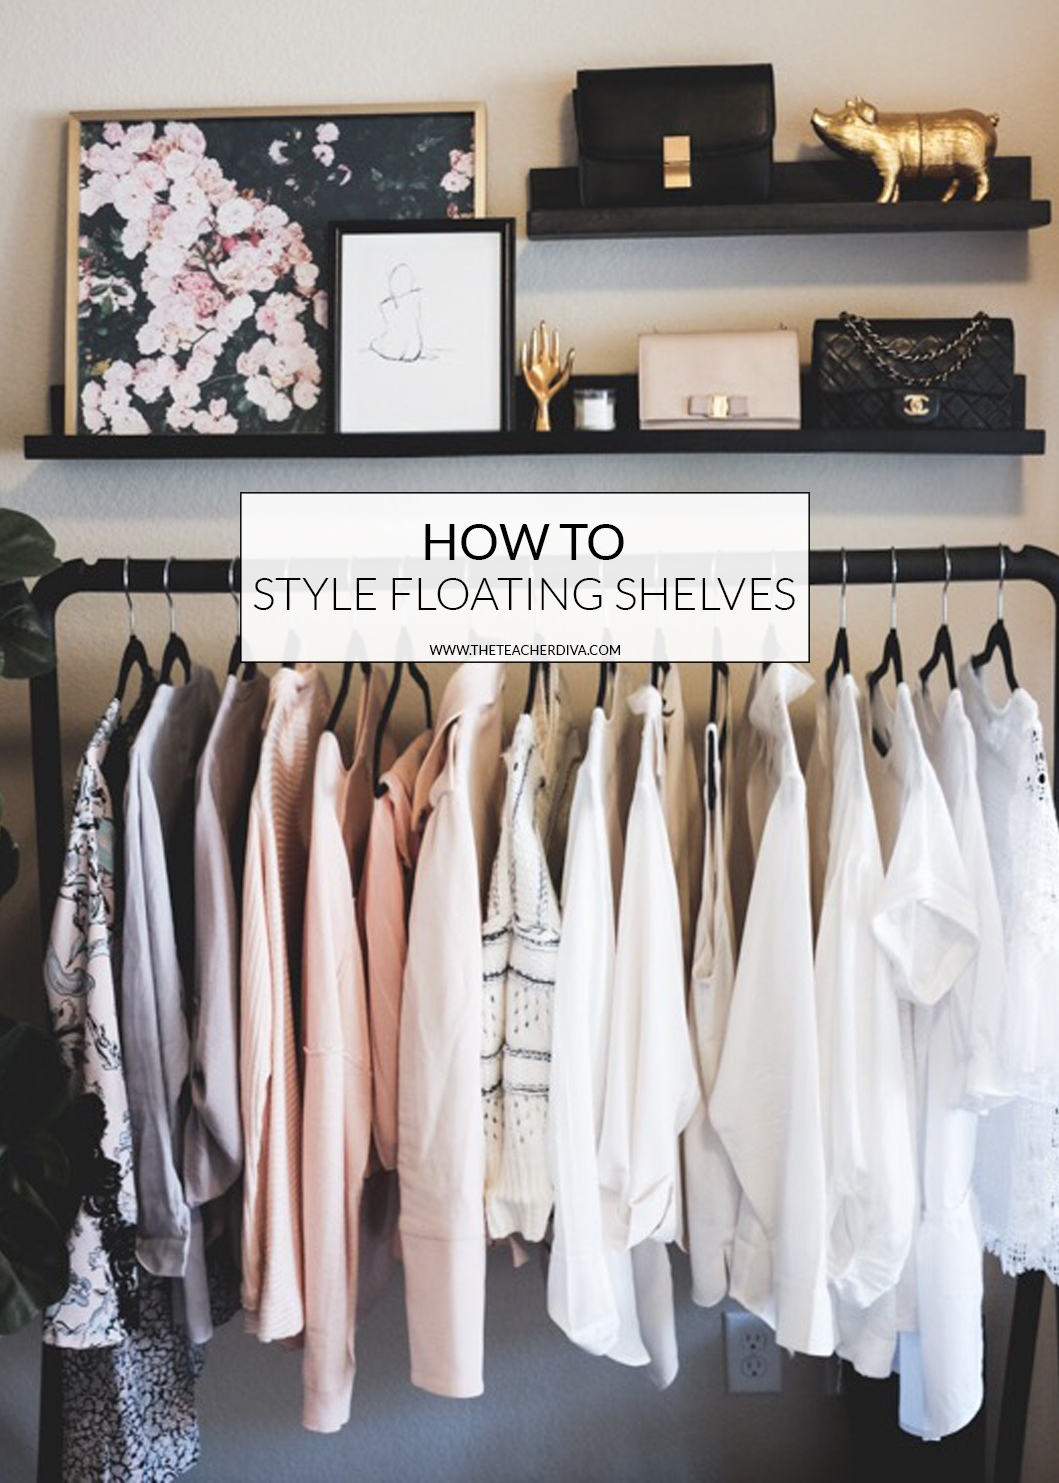 How To Style Floating Shelves  The Teacher Diva: a Dallas Fashion